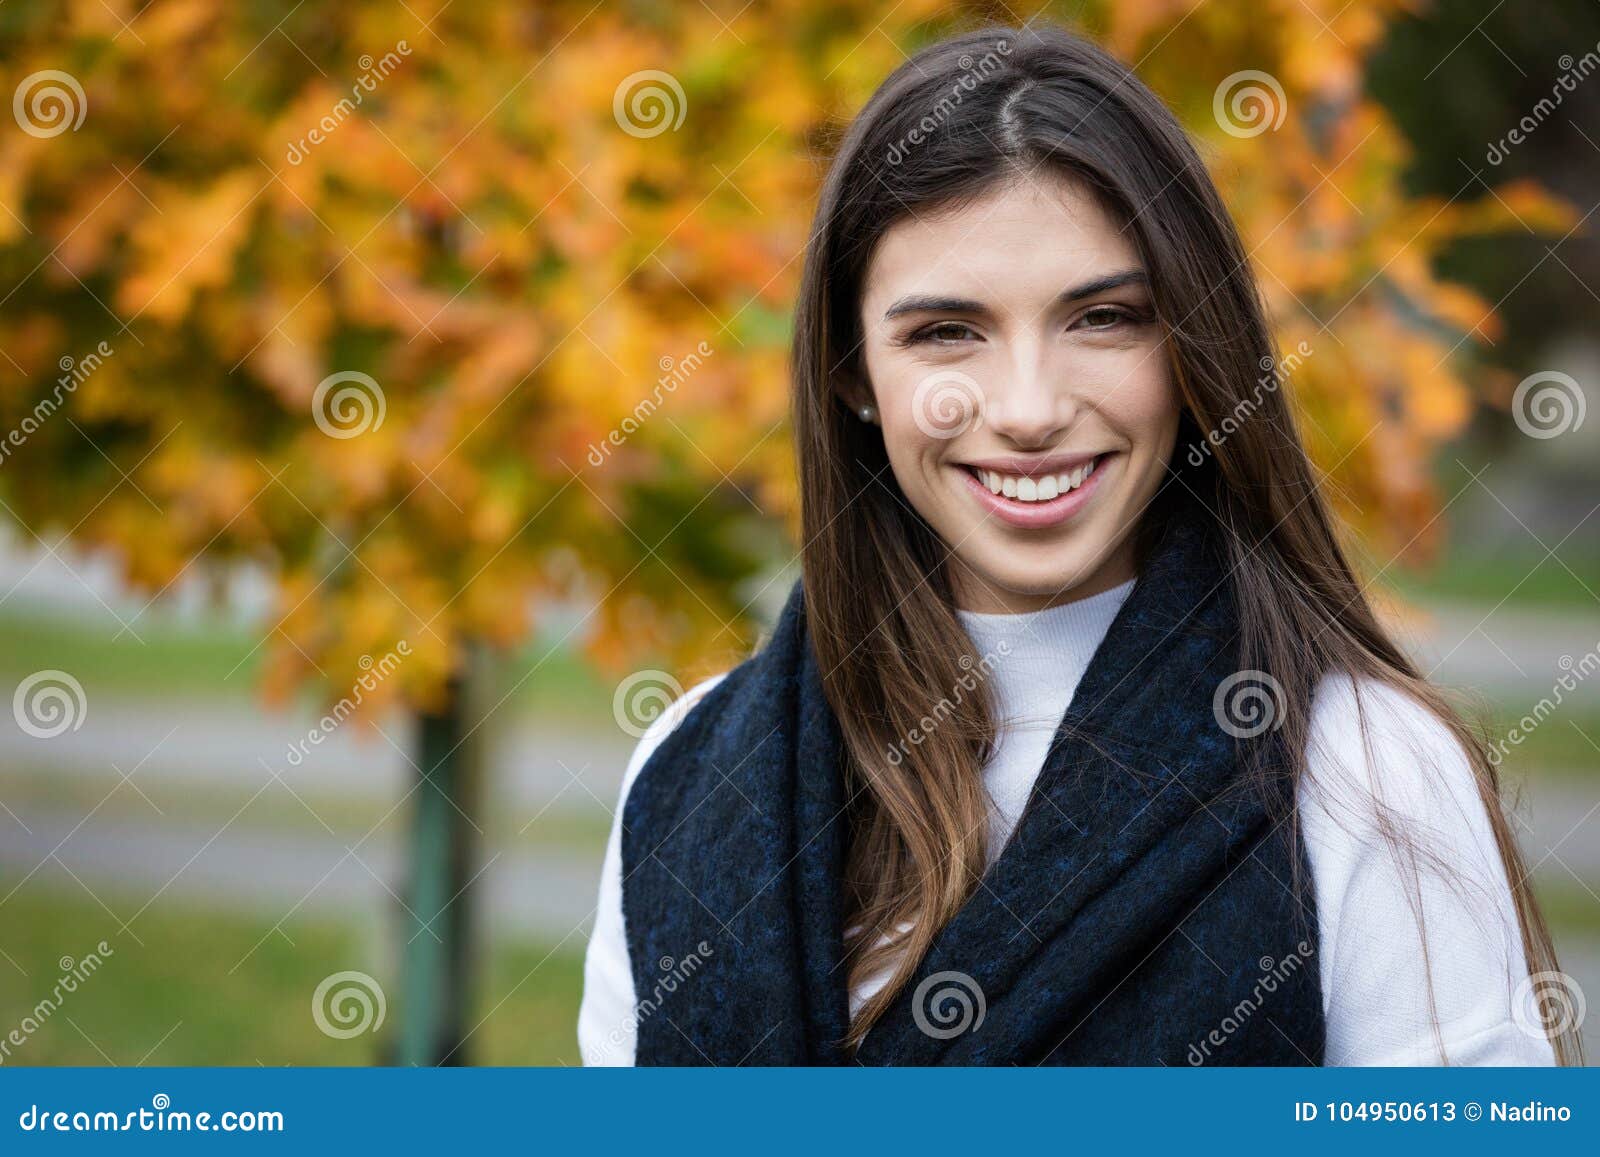 Portrait of a Young Woman Smiling Outside Stock Image - Image of ...